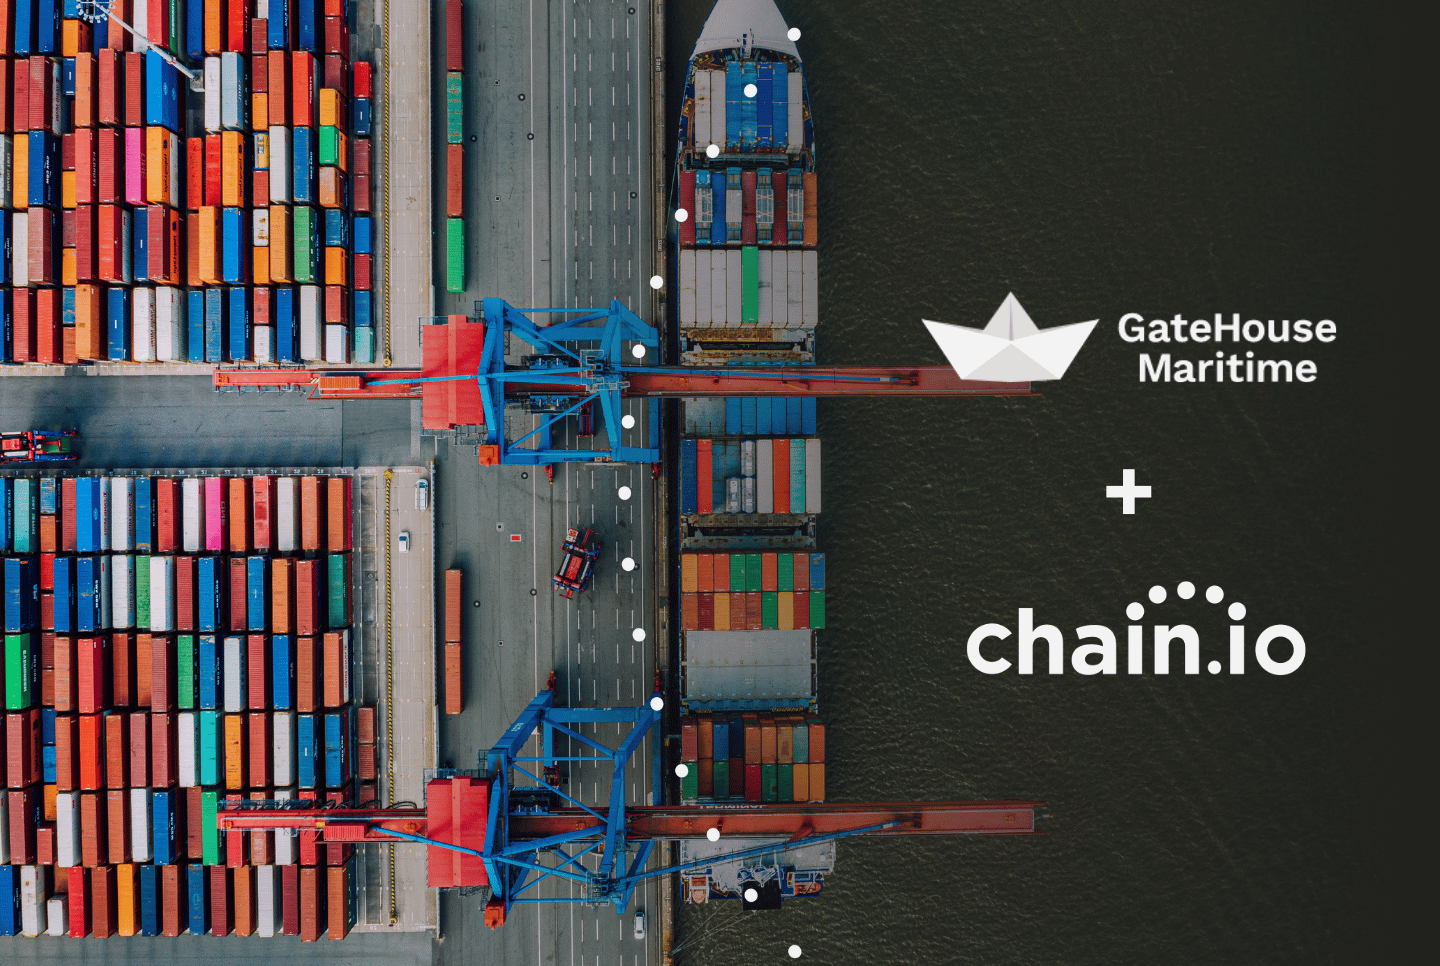 Chain.io will add GateHouse Maritime to its network, enabling freight forwarders to integrate ocean shipment insights with their supply chain ecosystem